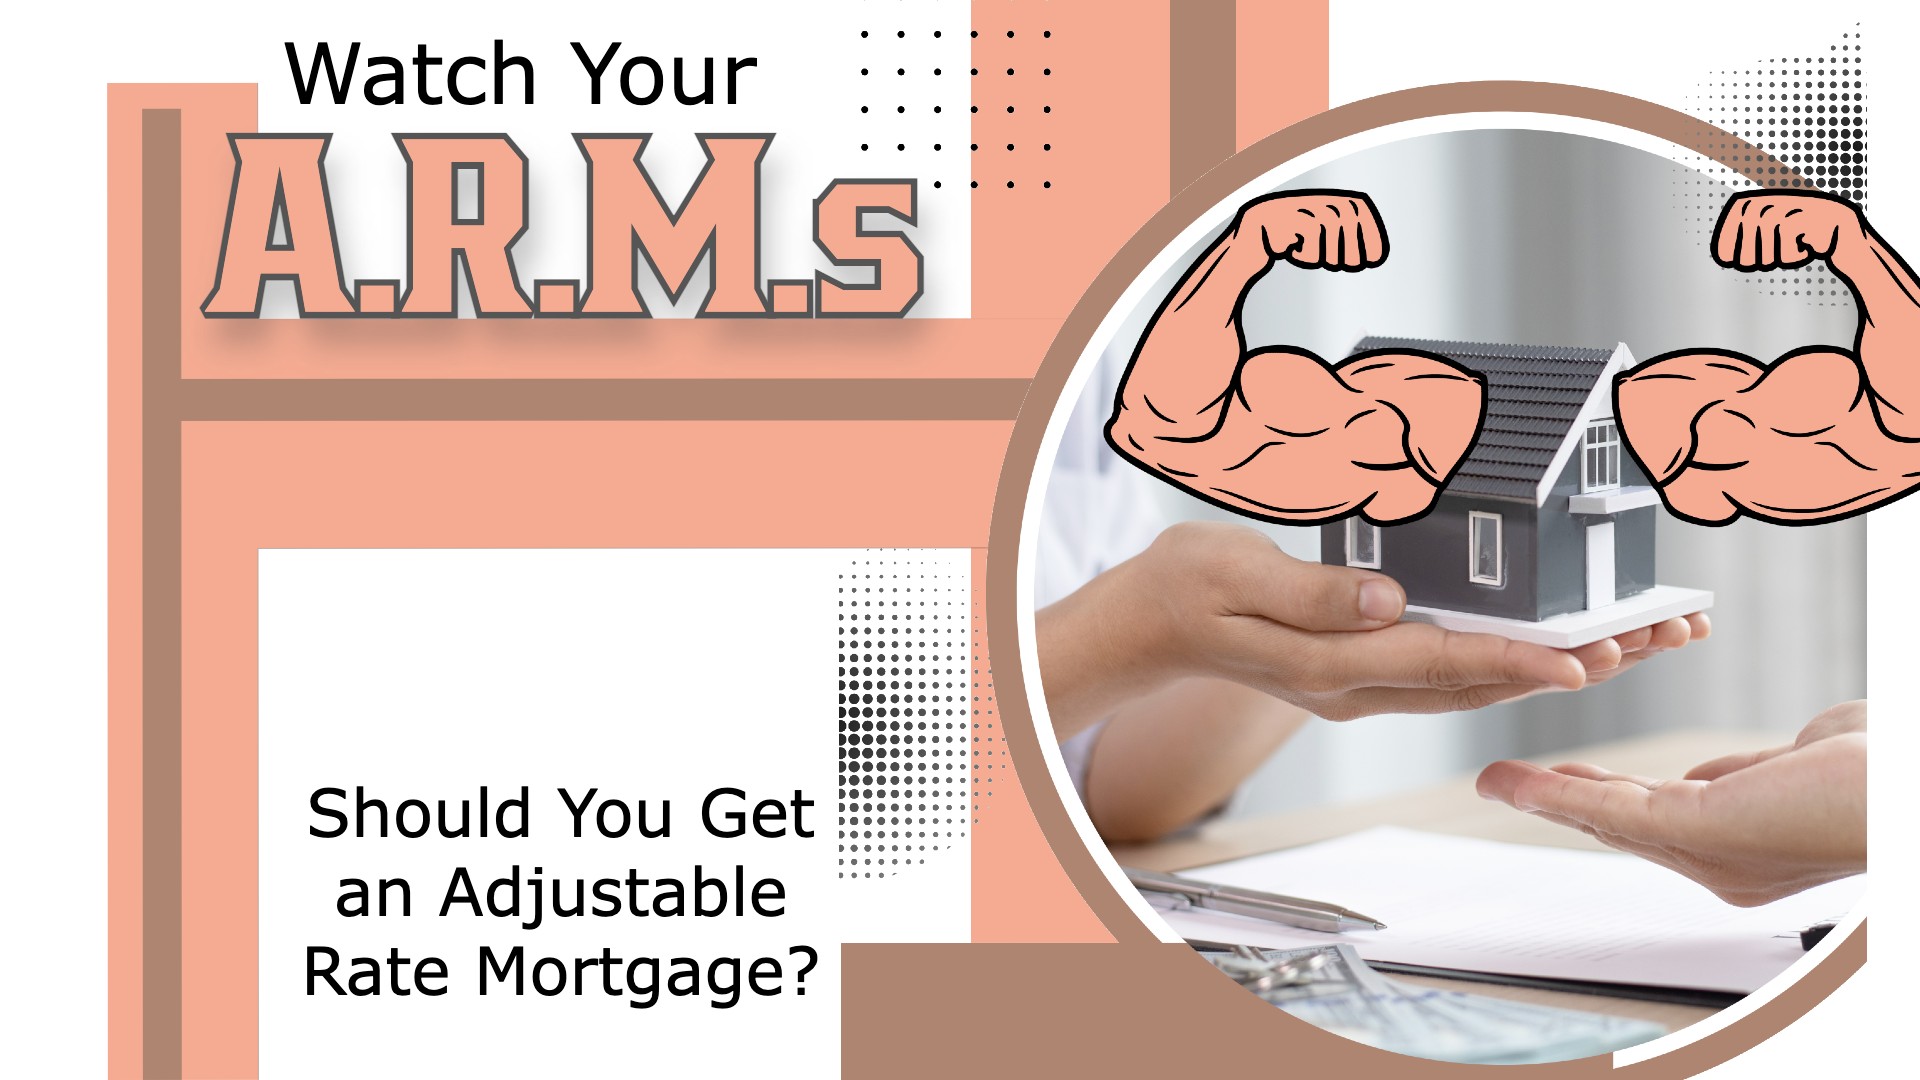 Watch Your A.R.M.s: Should You Get an Adjustable Rate Mortgage?